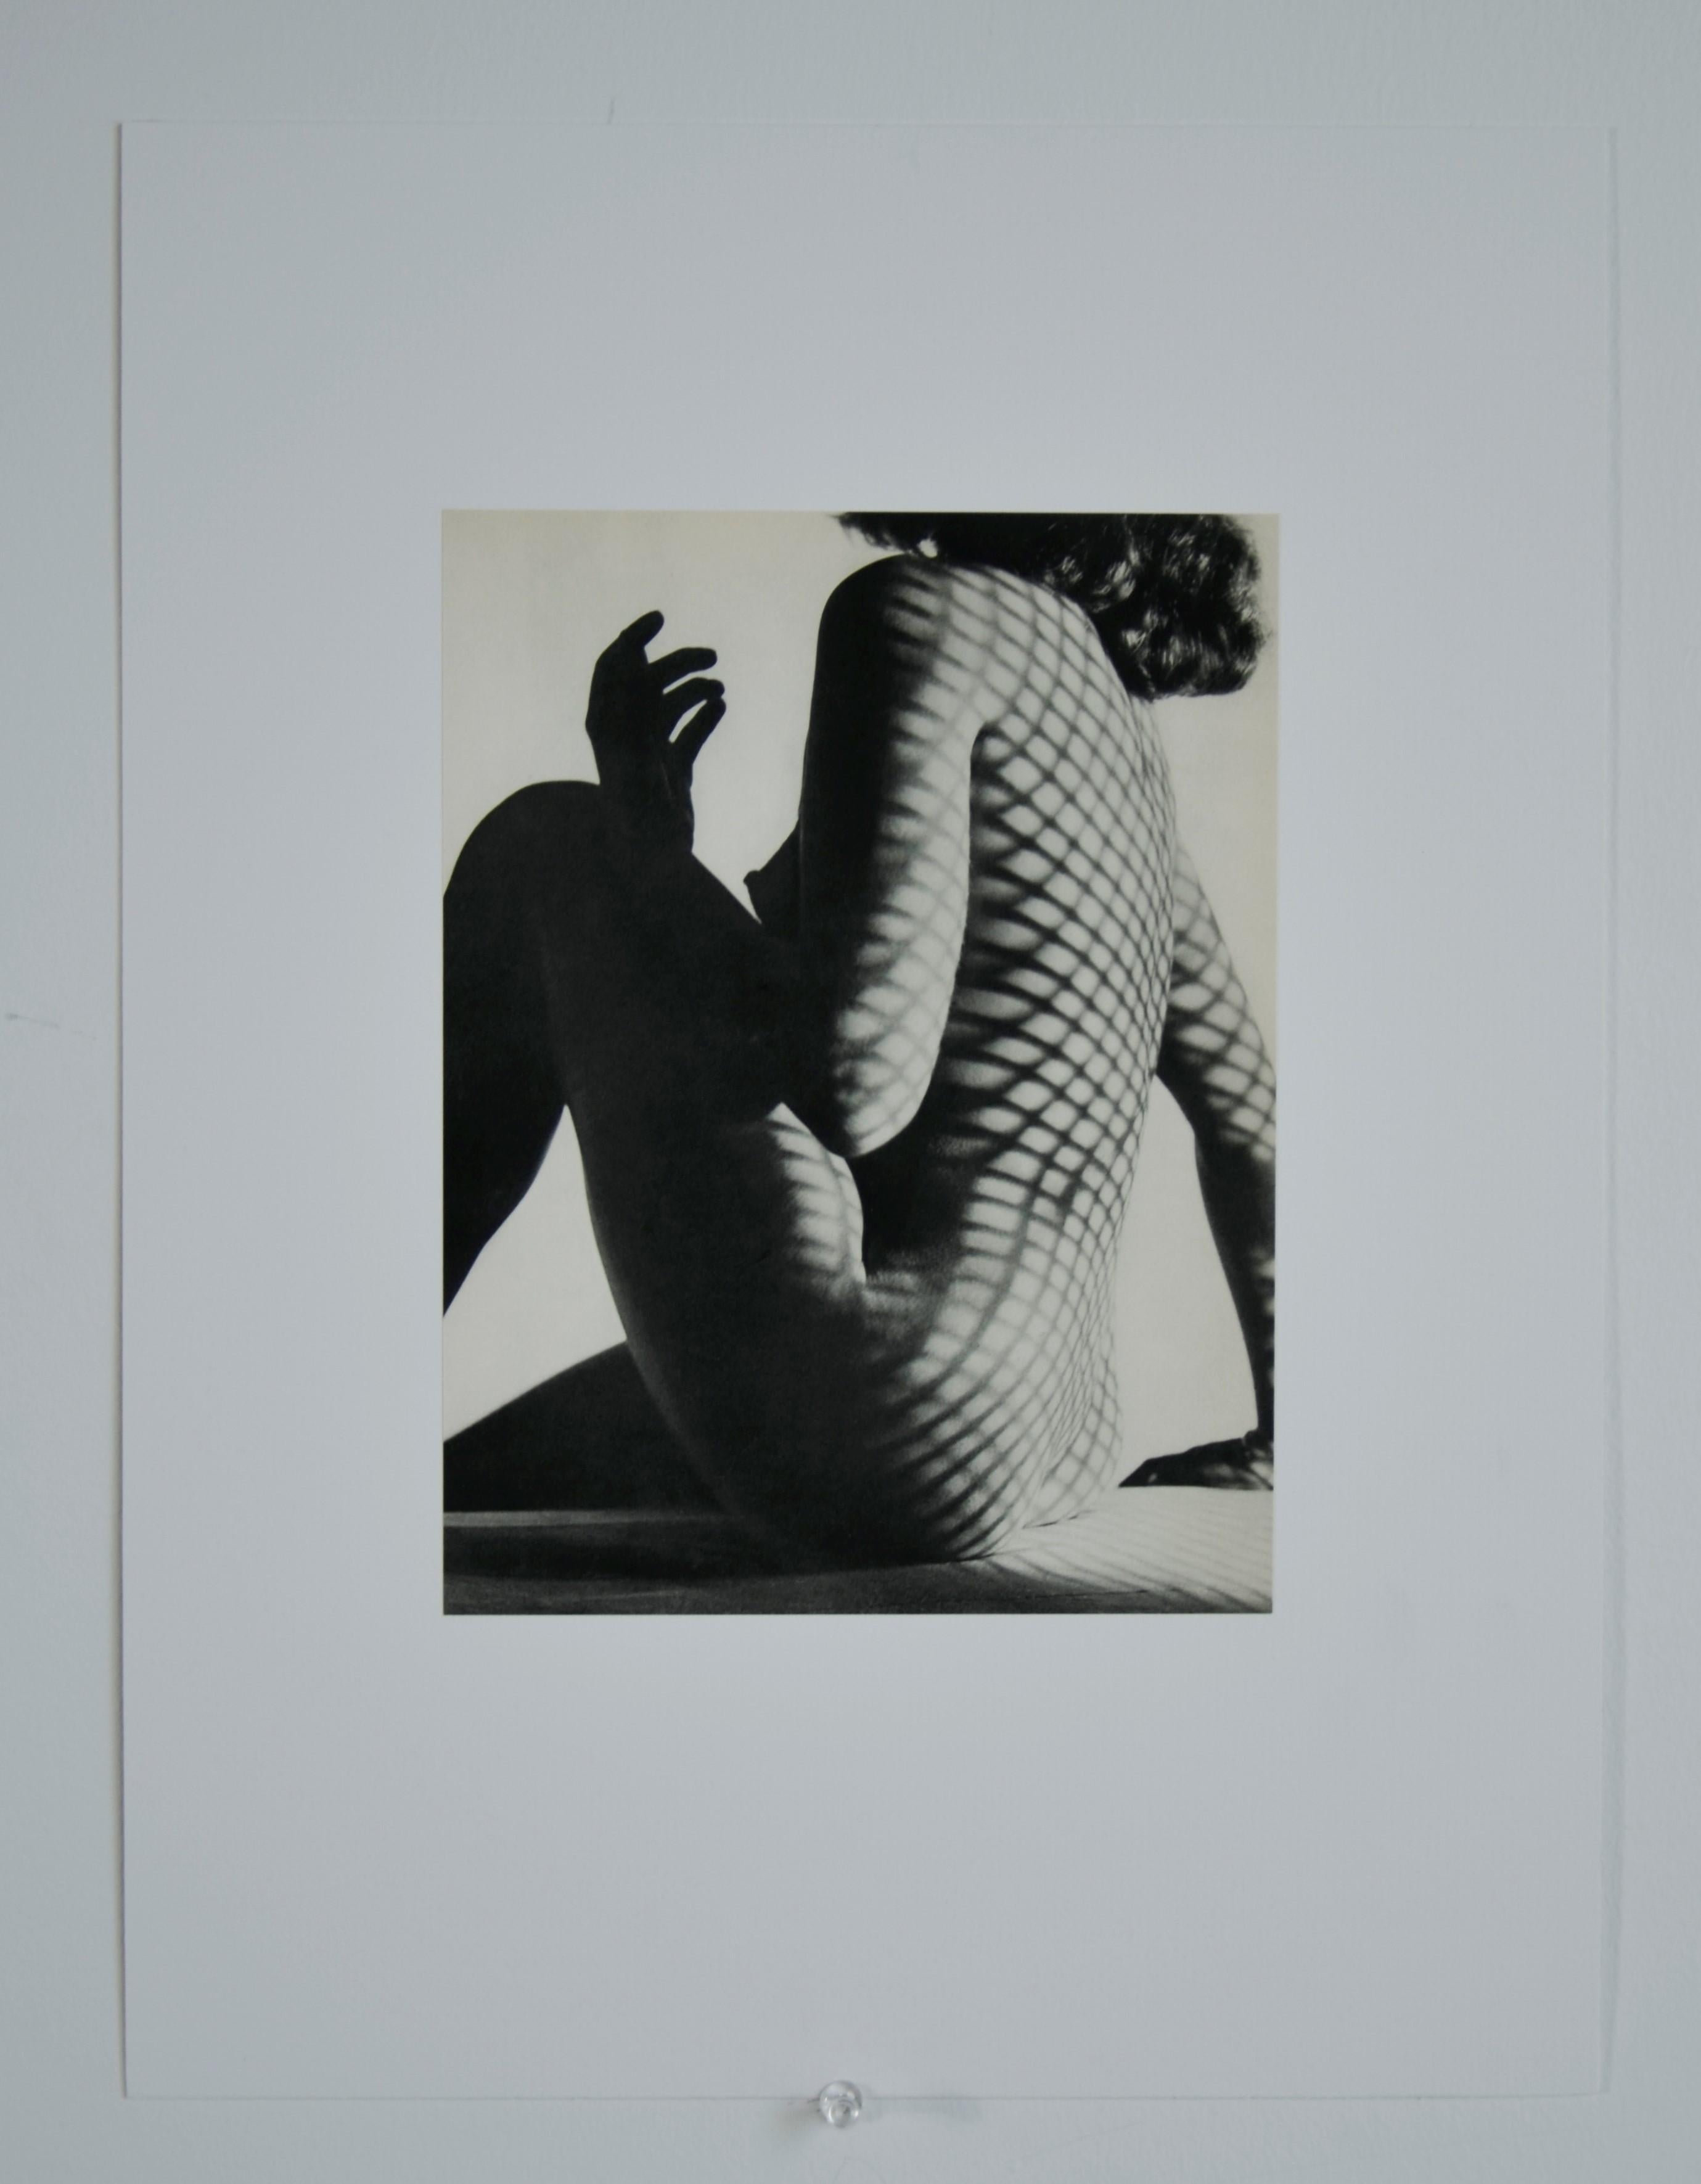 Offered is a black and white photograph, sheet-fed gravure by Heinrich Heidersberger, entitled 